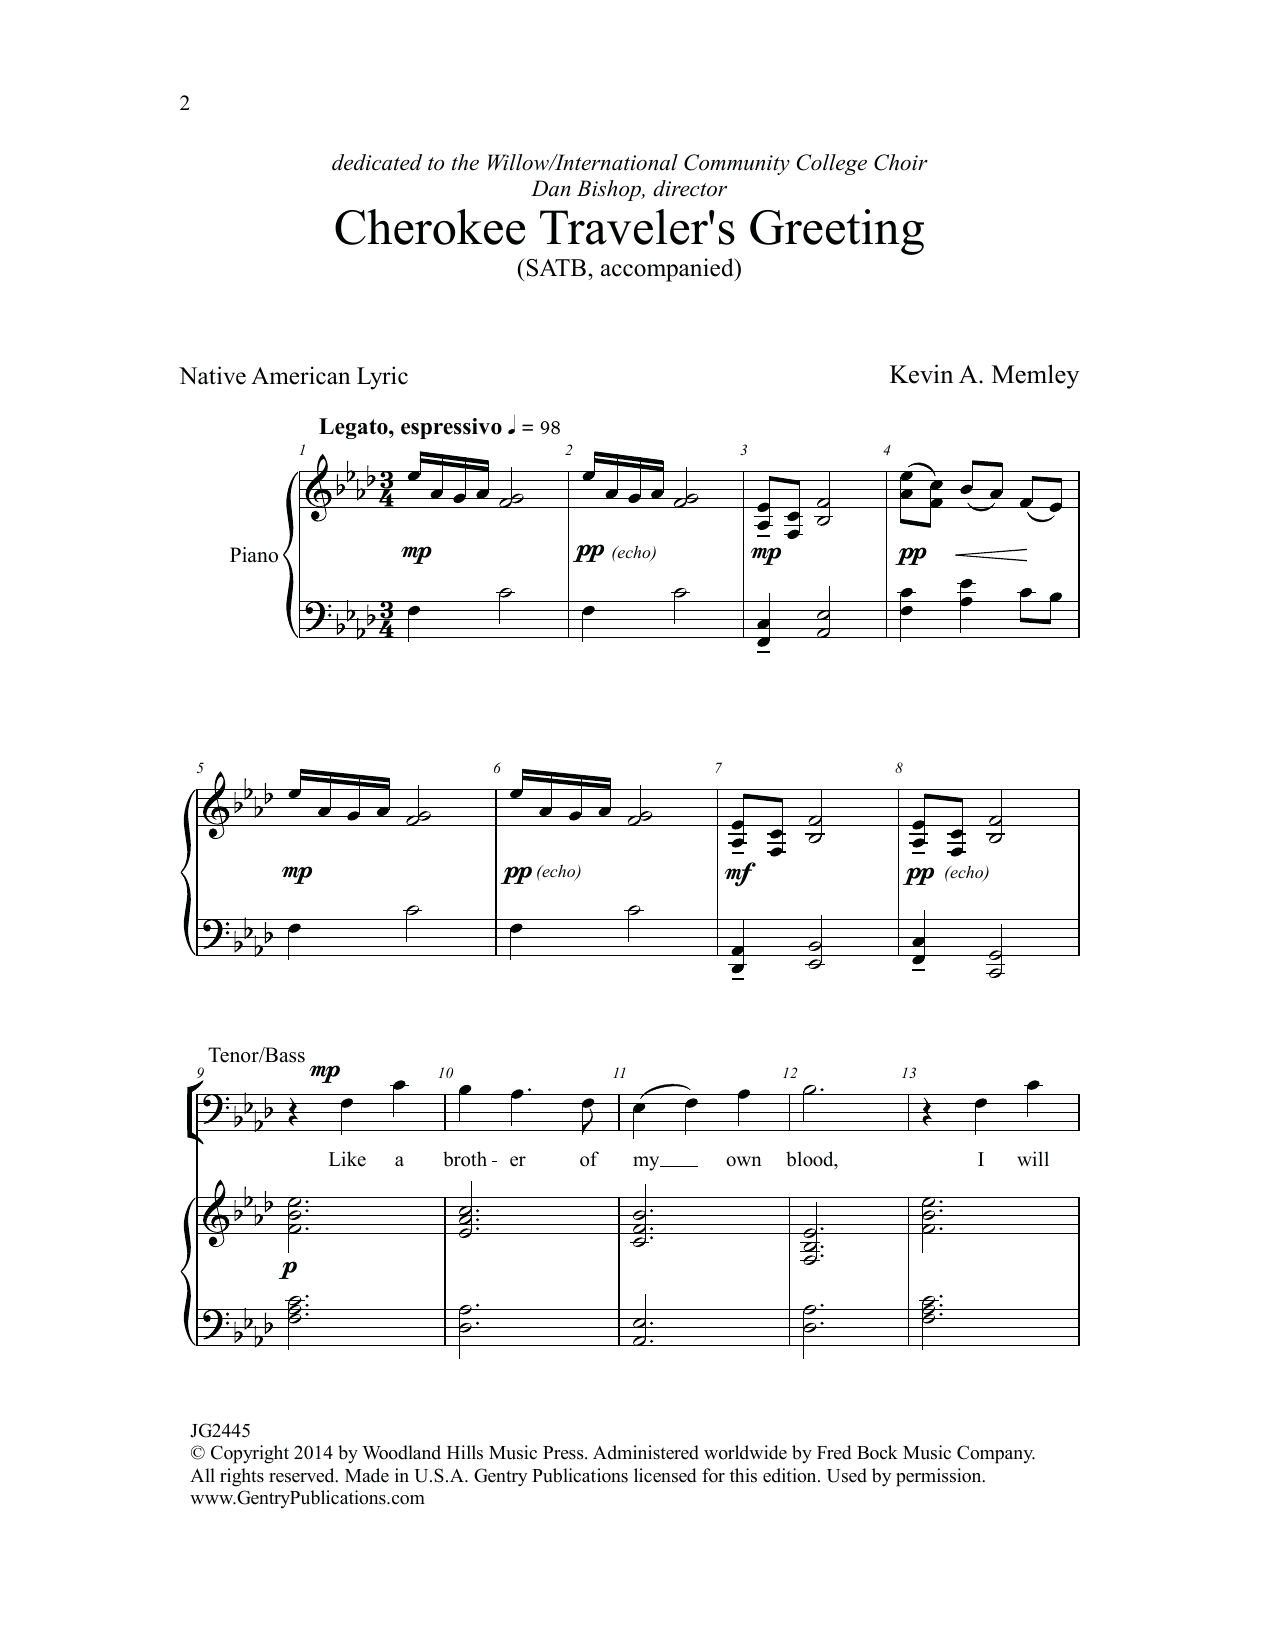 Download Kevin A. Memley Cherokee Traveler's Greeting Sheet Music